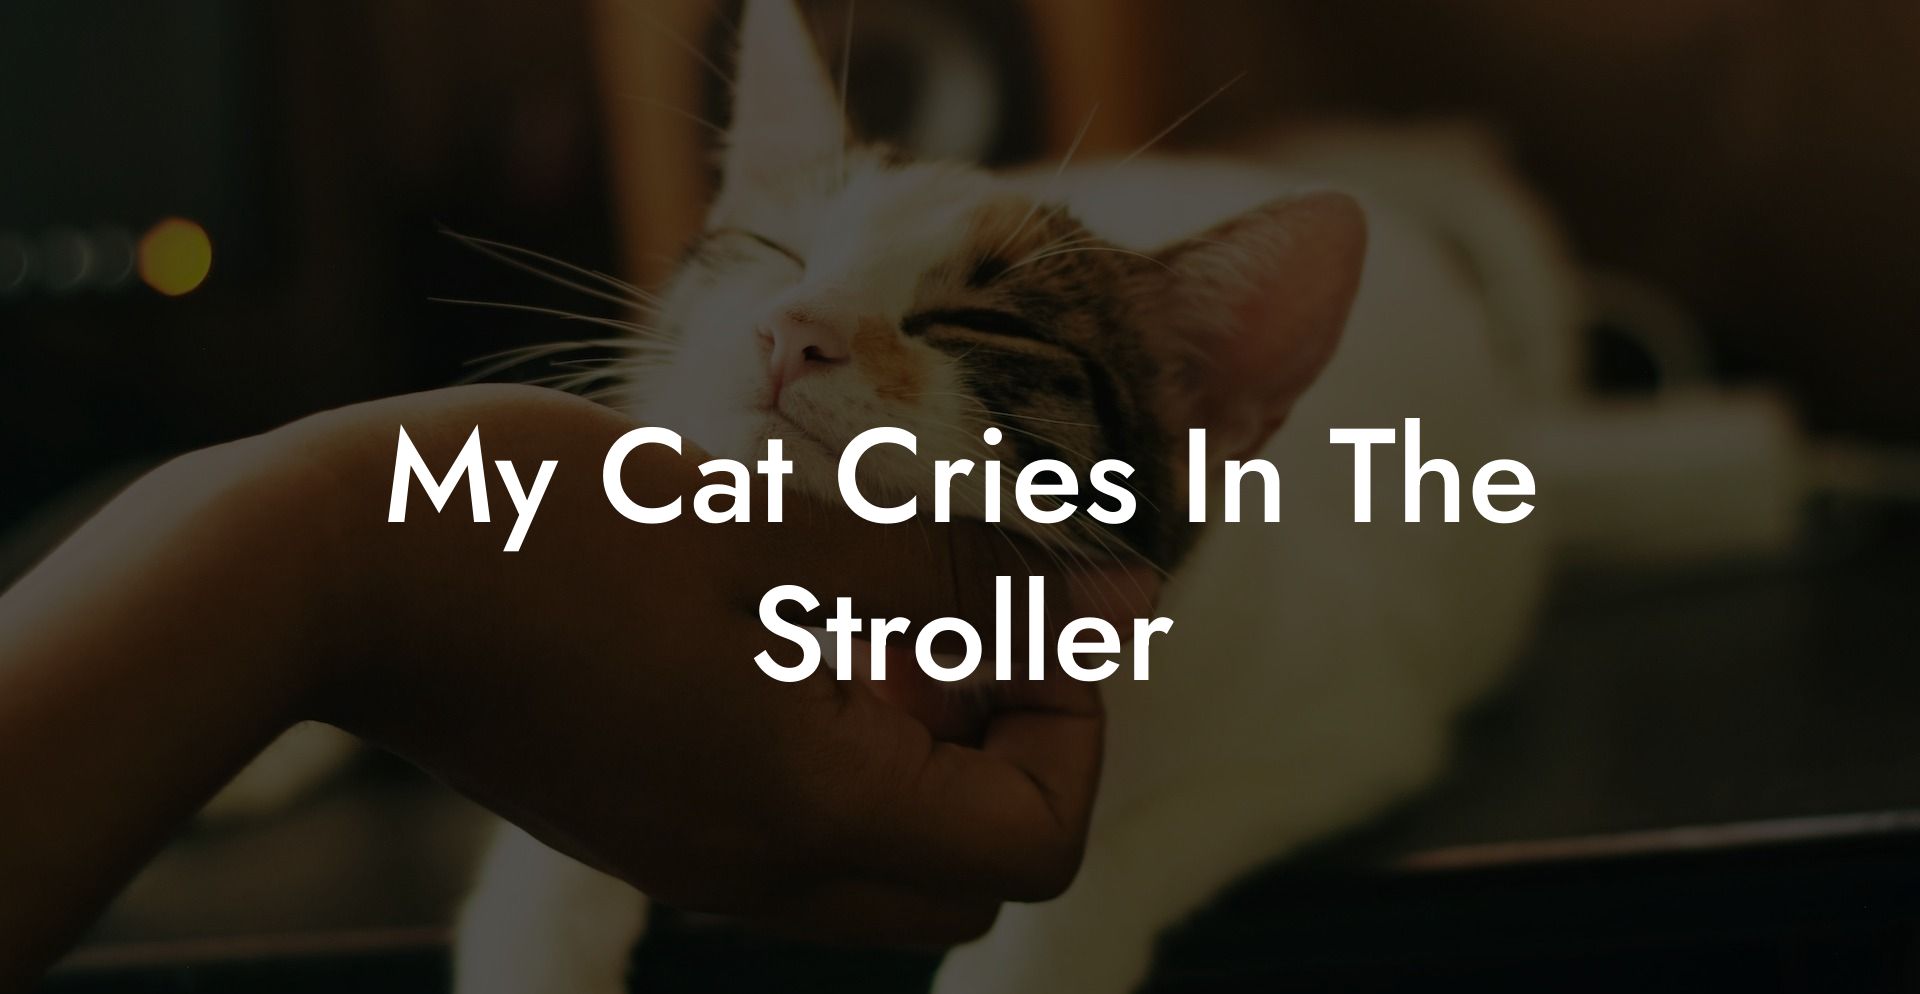 My Cat Cries In The Stroller